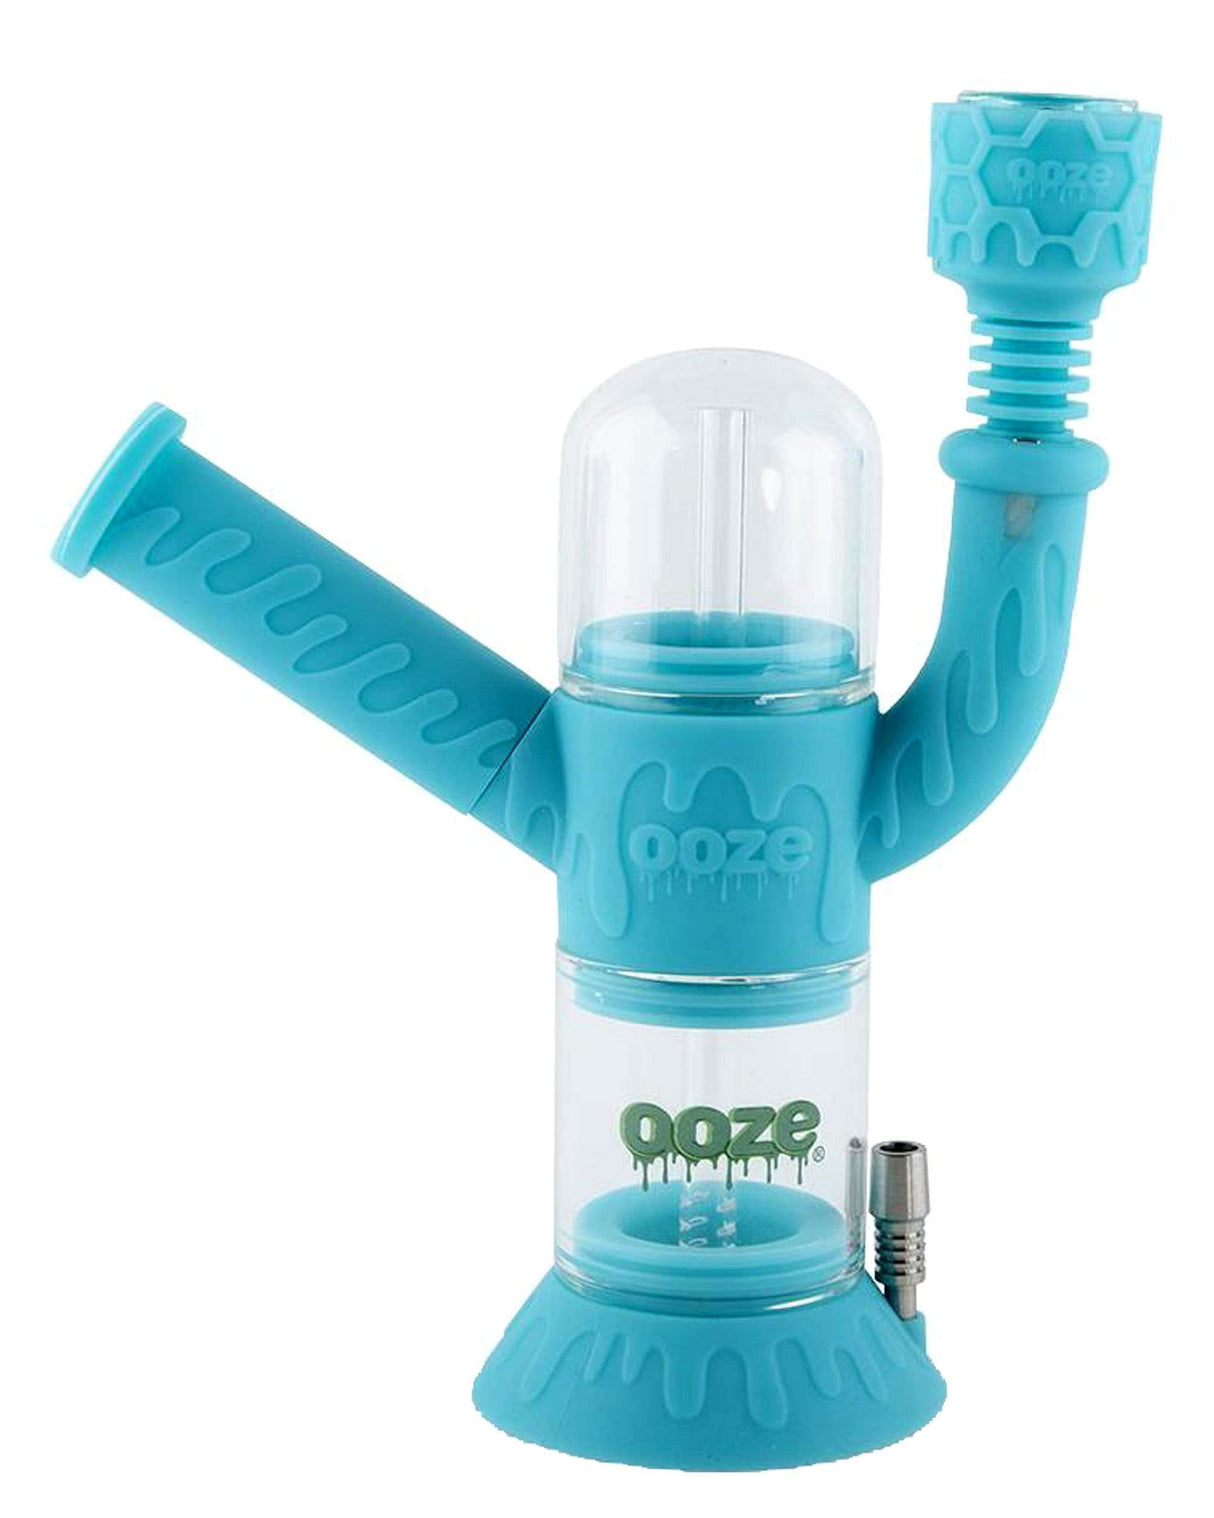 Ooze Cranium Bong & Dab Rig in Teal with Quartz Banger and Silicone Body, Front View